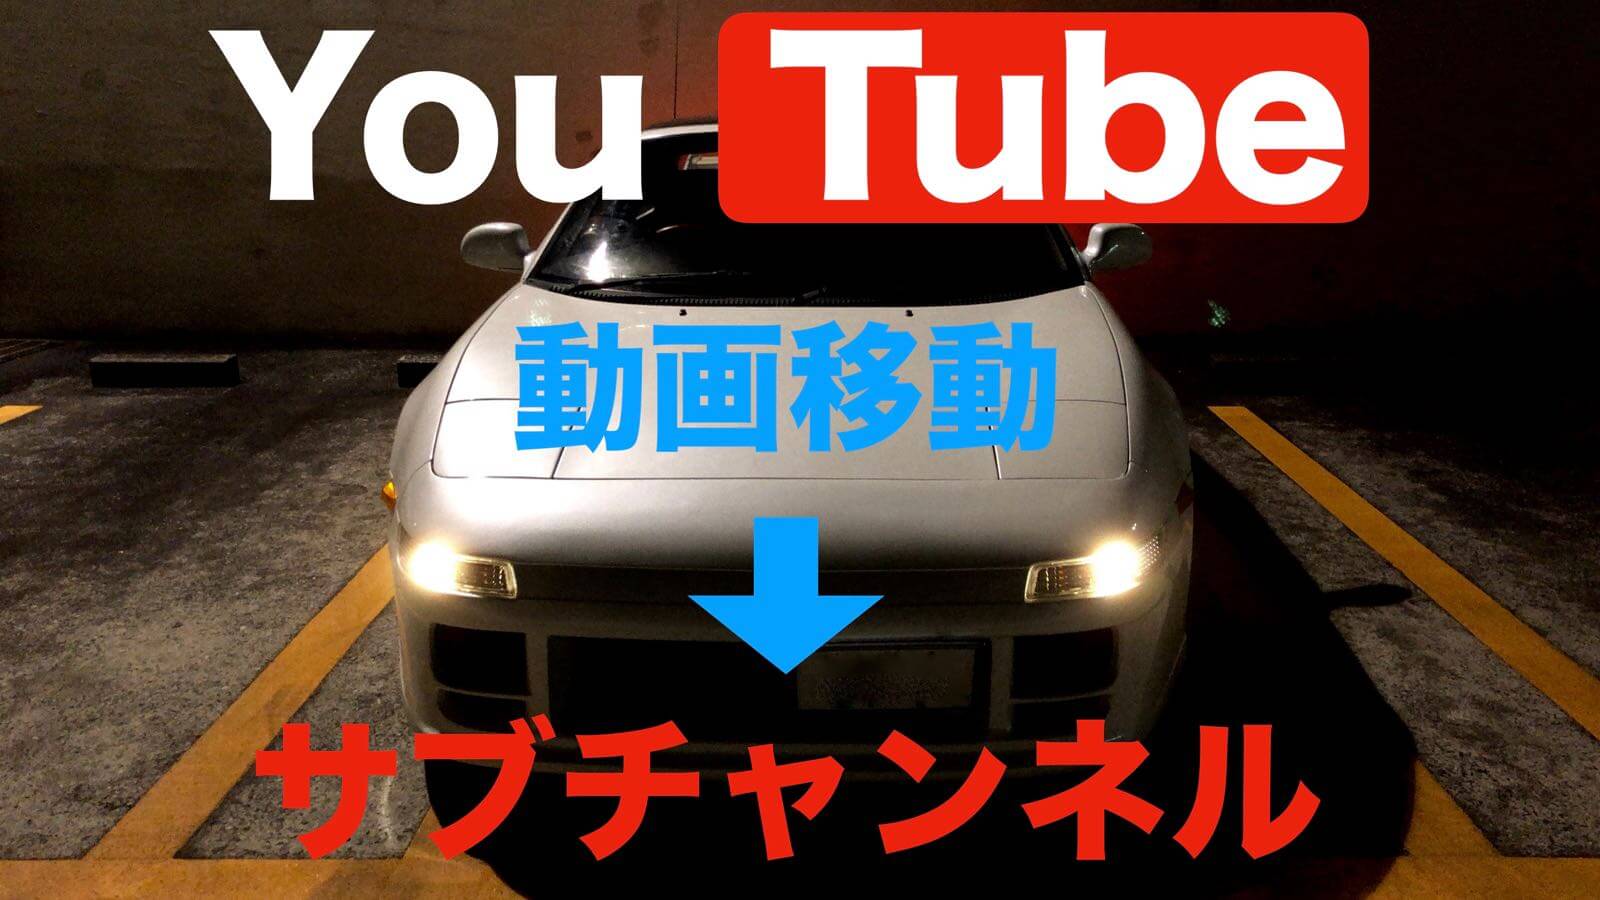 0213 How to move youtube videos to subchannels 01